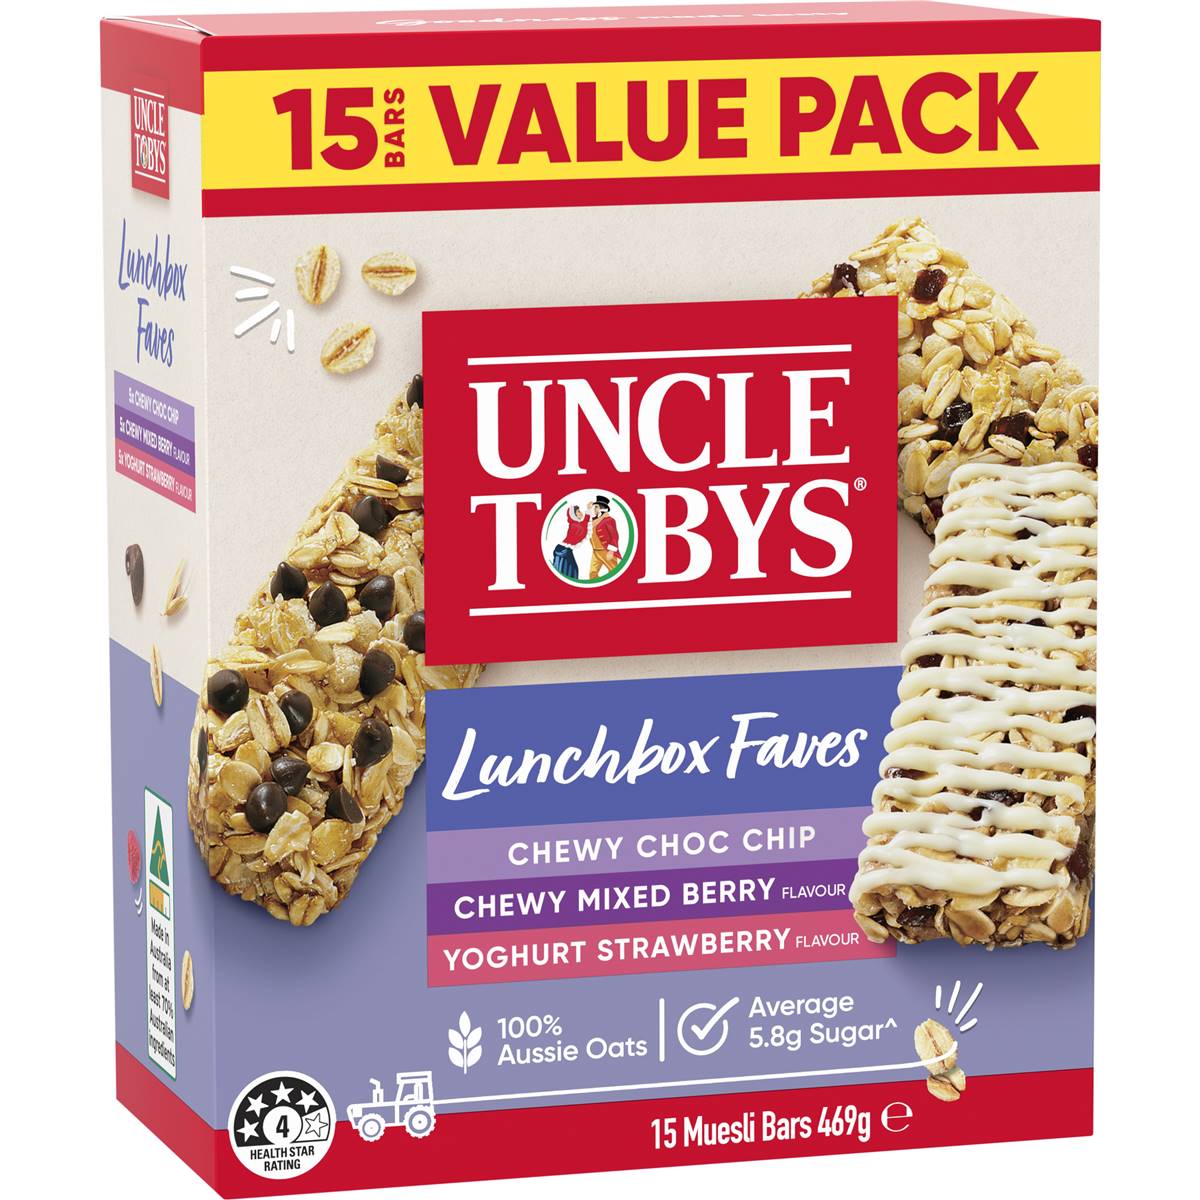 Calories in Uncle Tobys Lunchbox Faves Muesli Bars